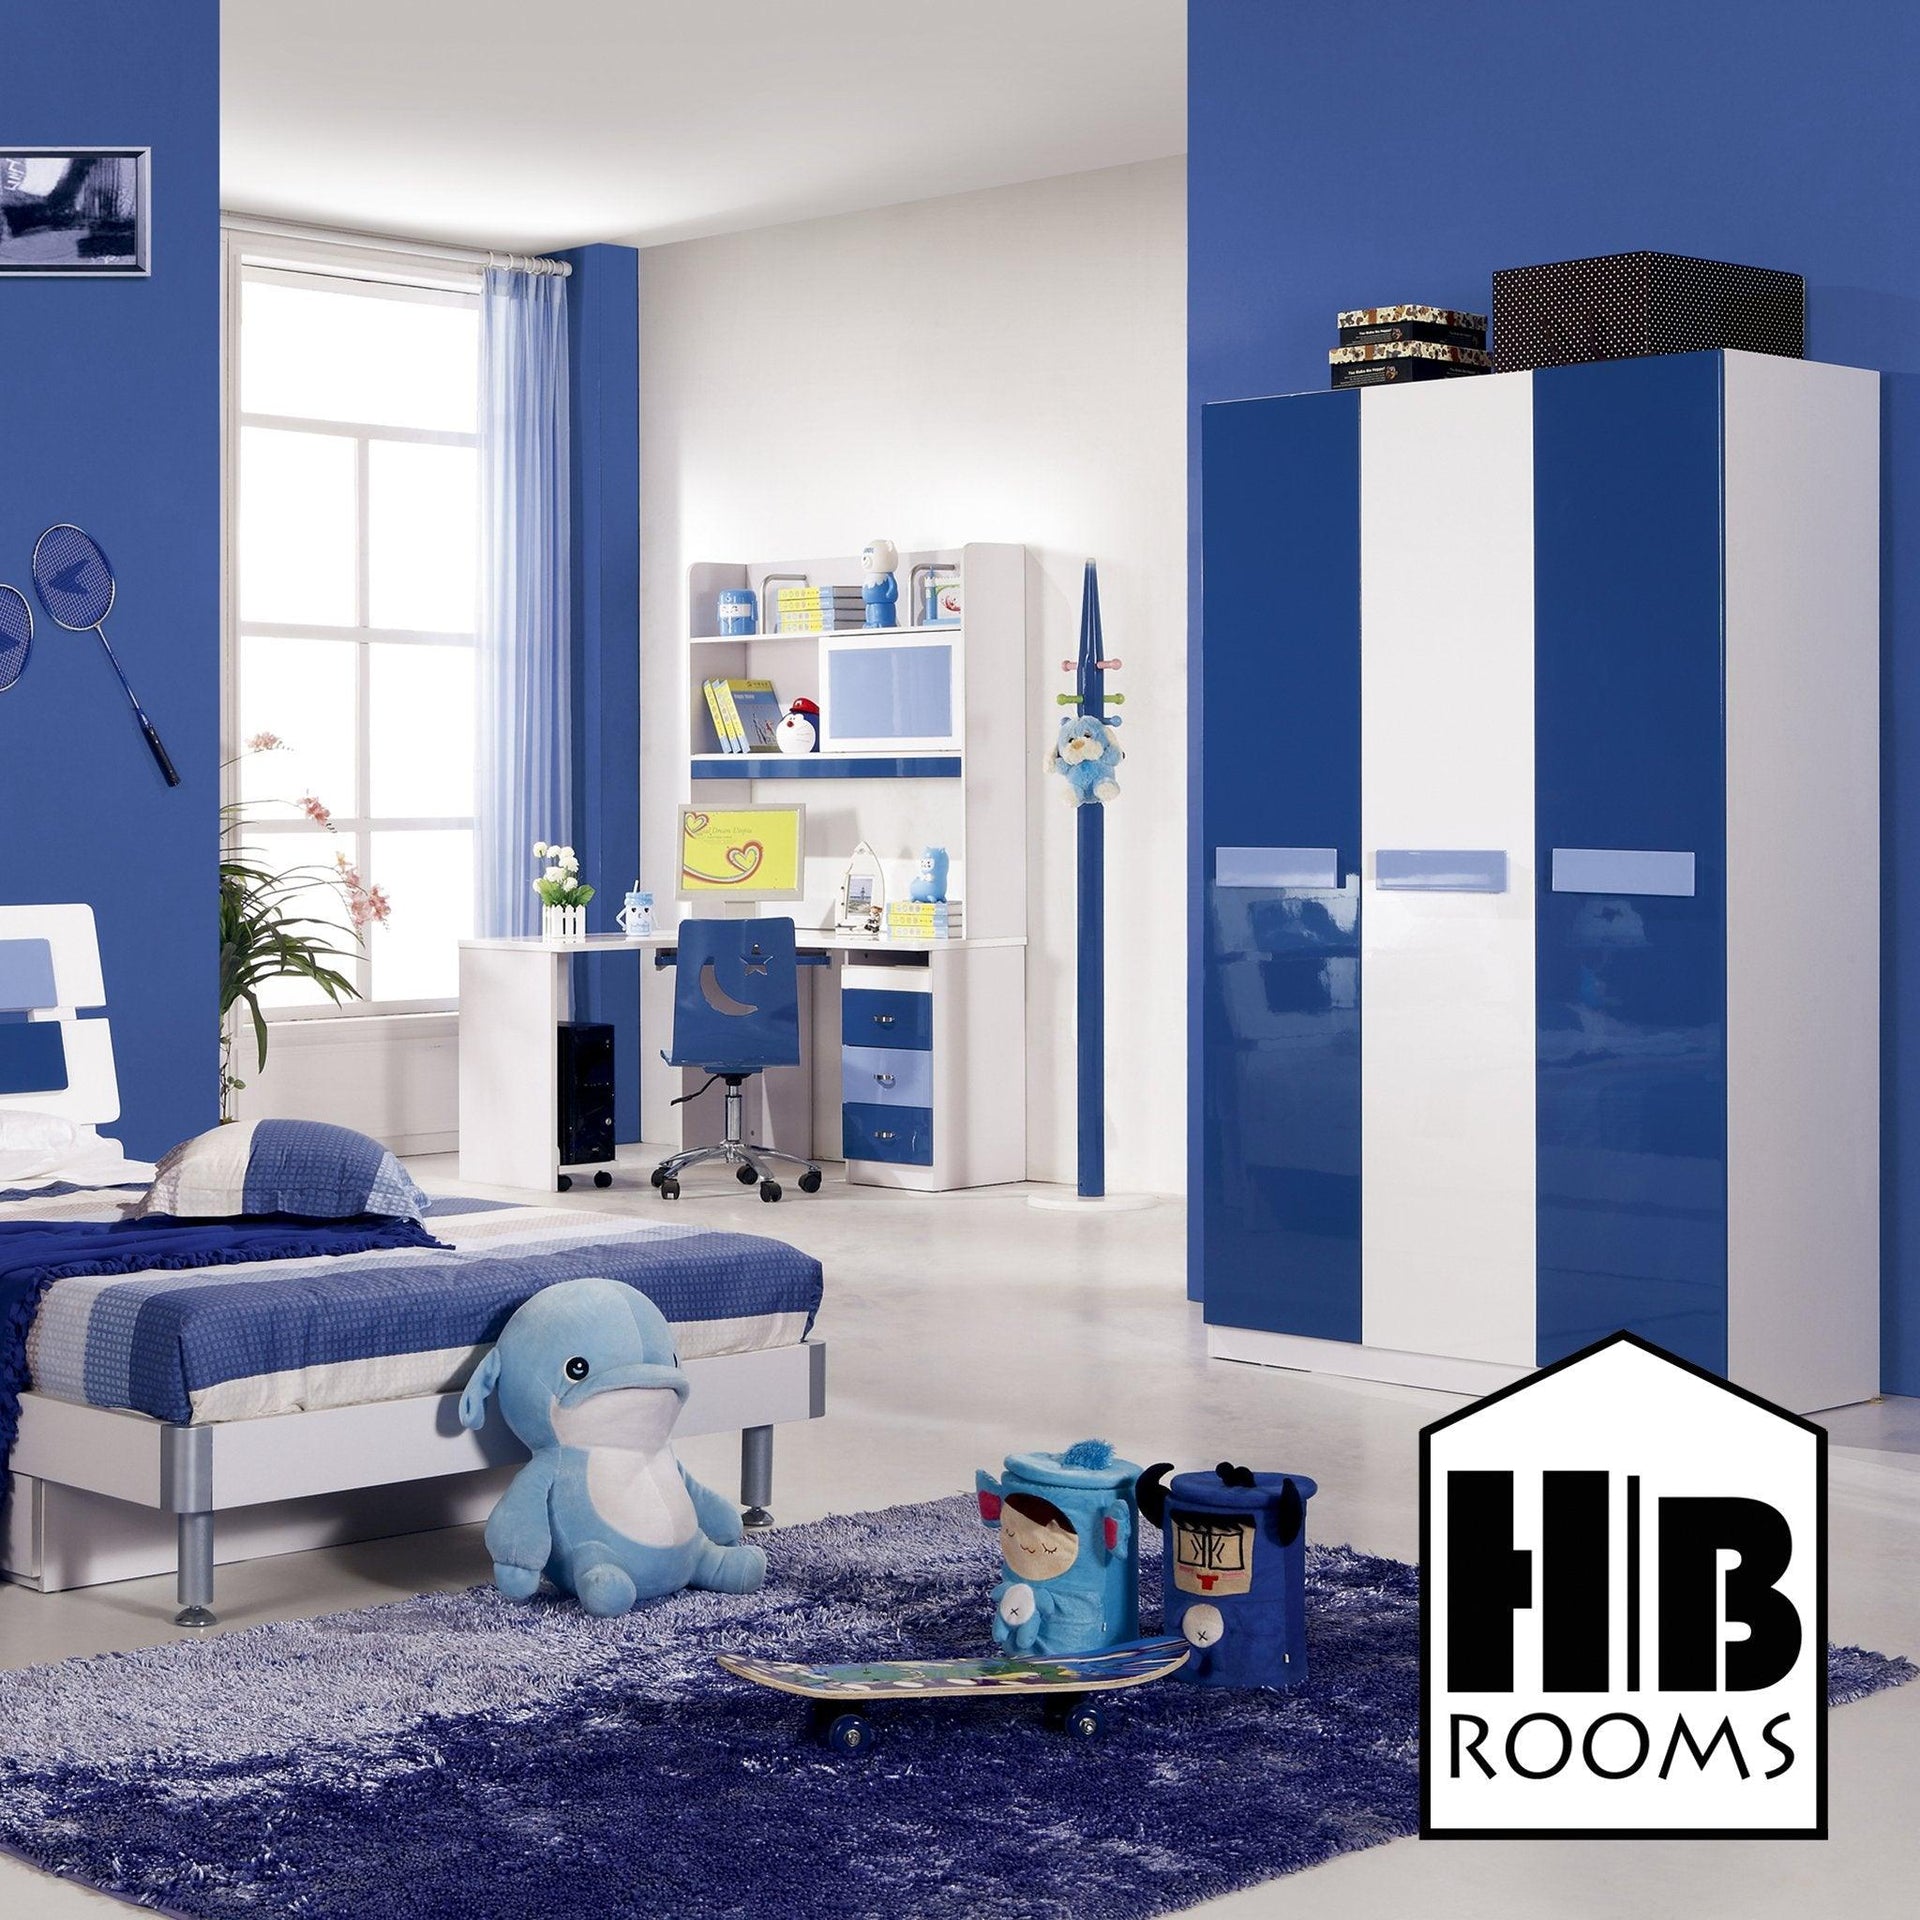 HB Rooms focus on practical solutions for your children. Designs are suitable even for older teenage kids.